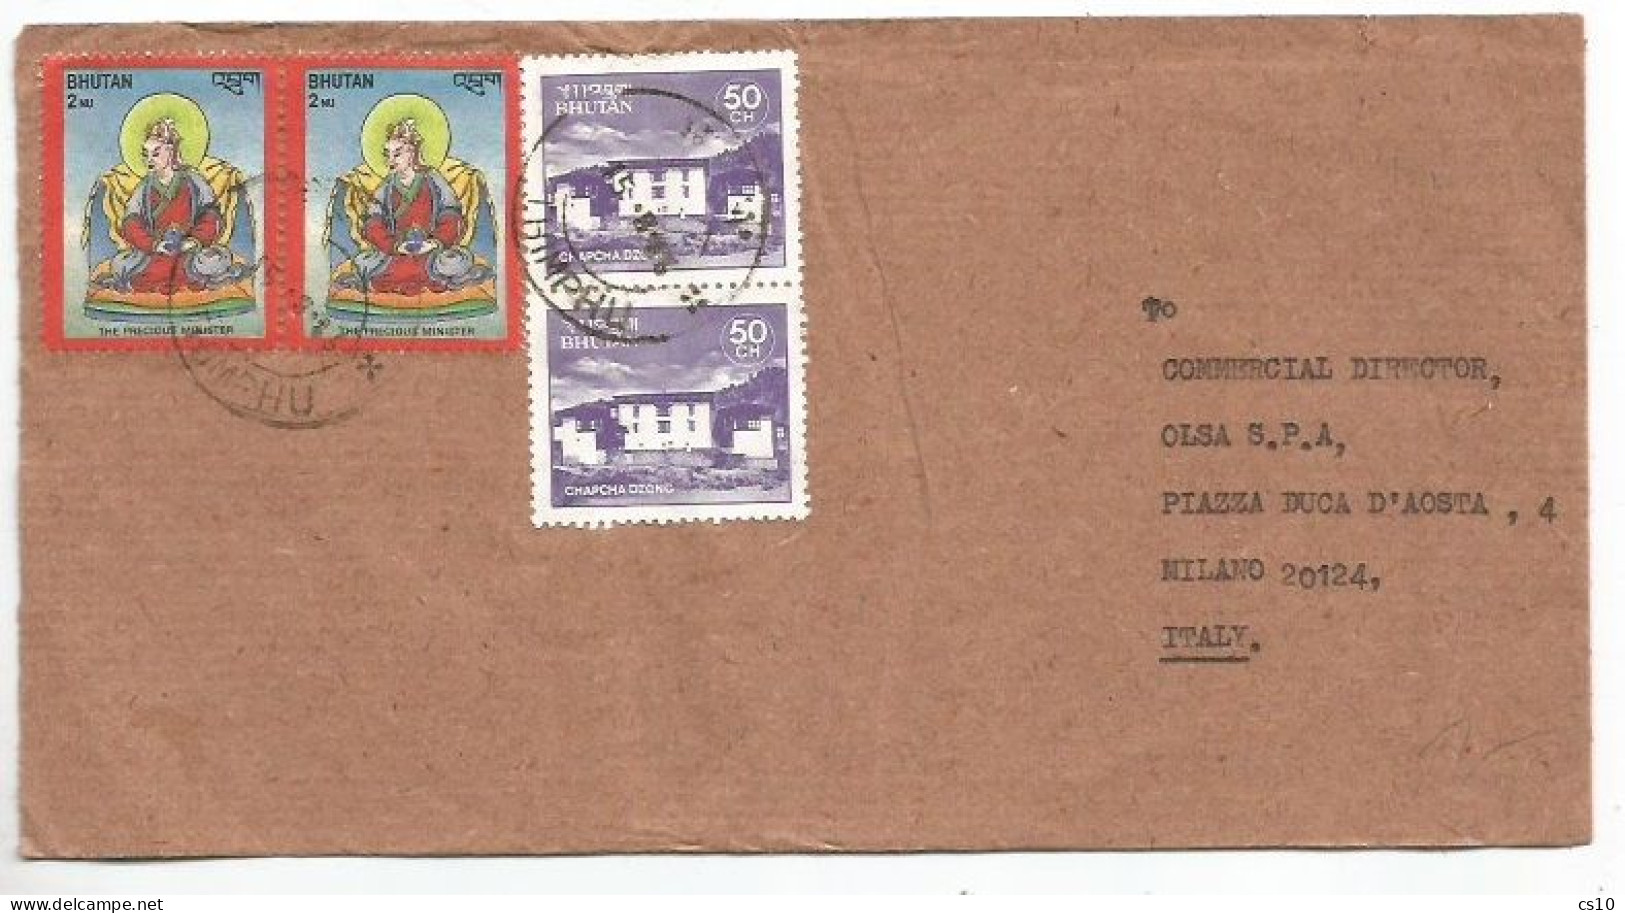 Bhutan Commerce Cover Thimphu 15aug1983 To Italy With 4 Stamps - Bhutan